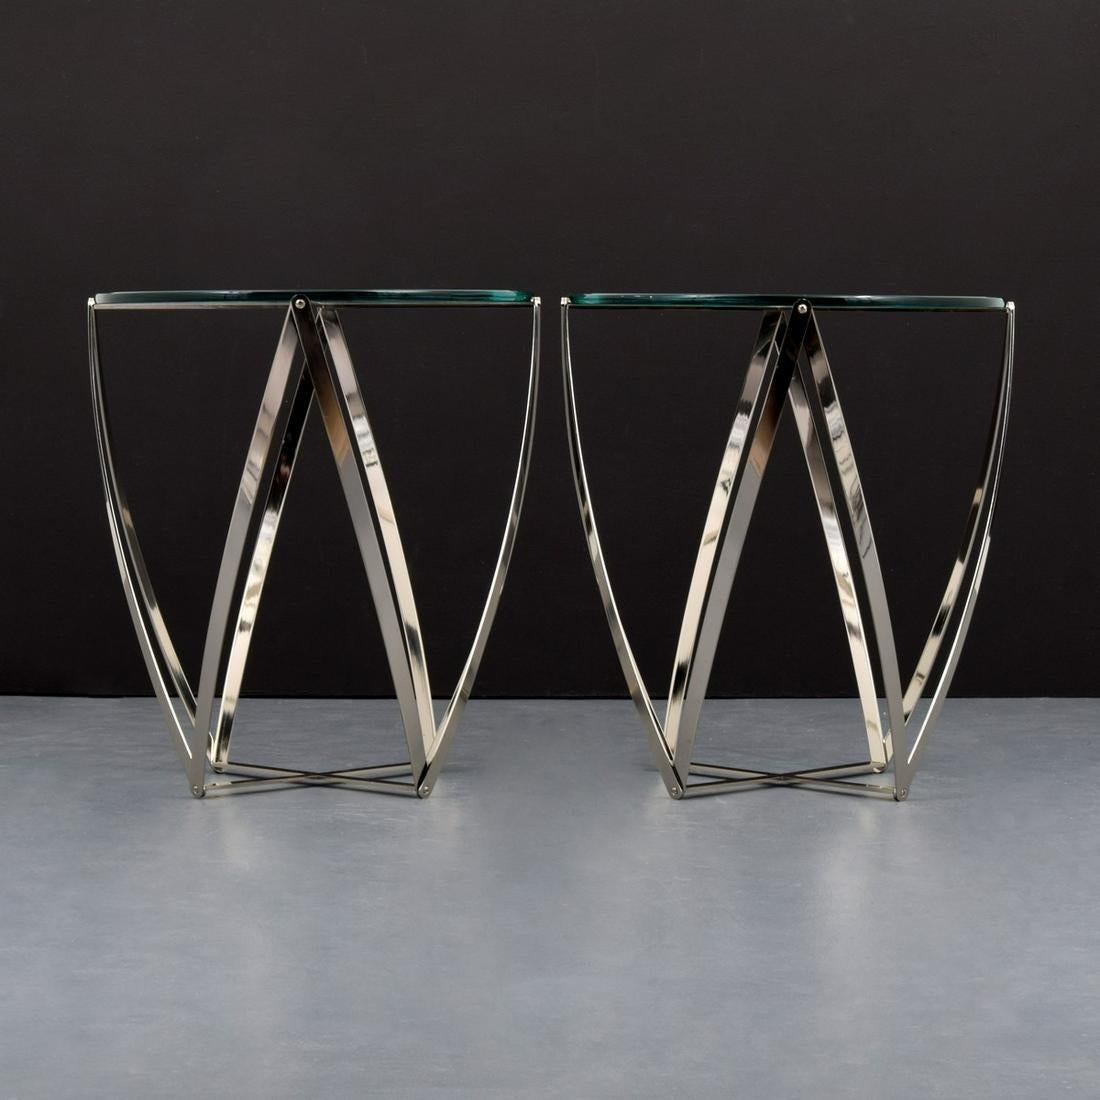 A pair of side or occasional table designed by John Vesey (1924-1992) in 1956.
Made from polished chromed steel strips with subtle zigzag pattern, these tables assume a traditional barrel form while maintaining a very modern appearance. They are